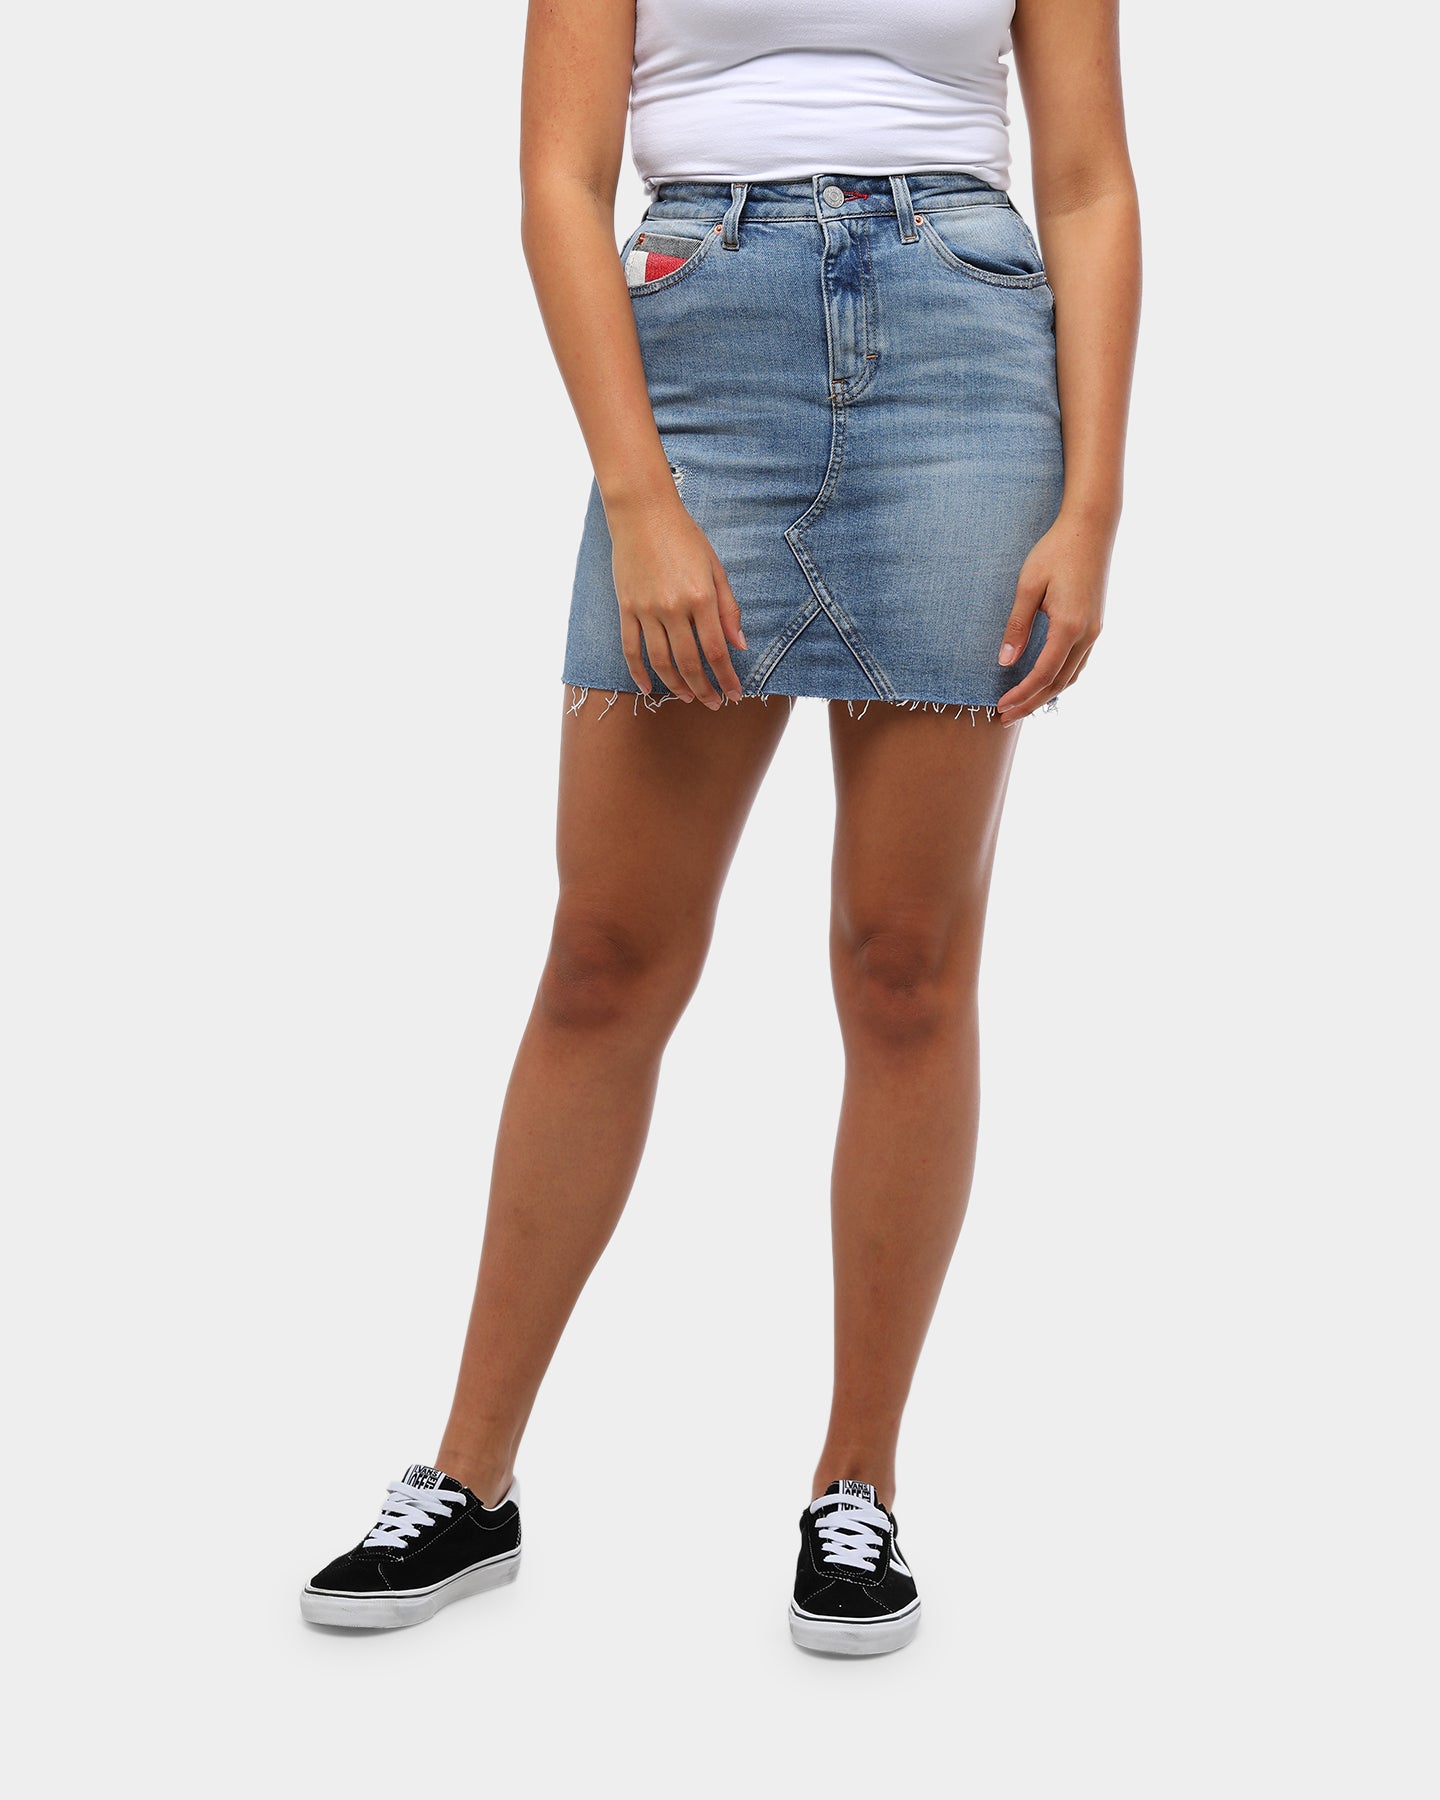 tommy jeans skirt